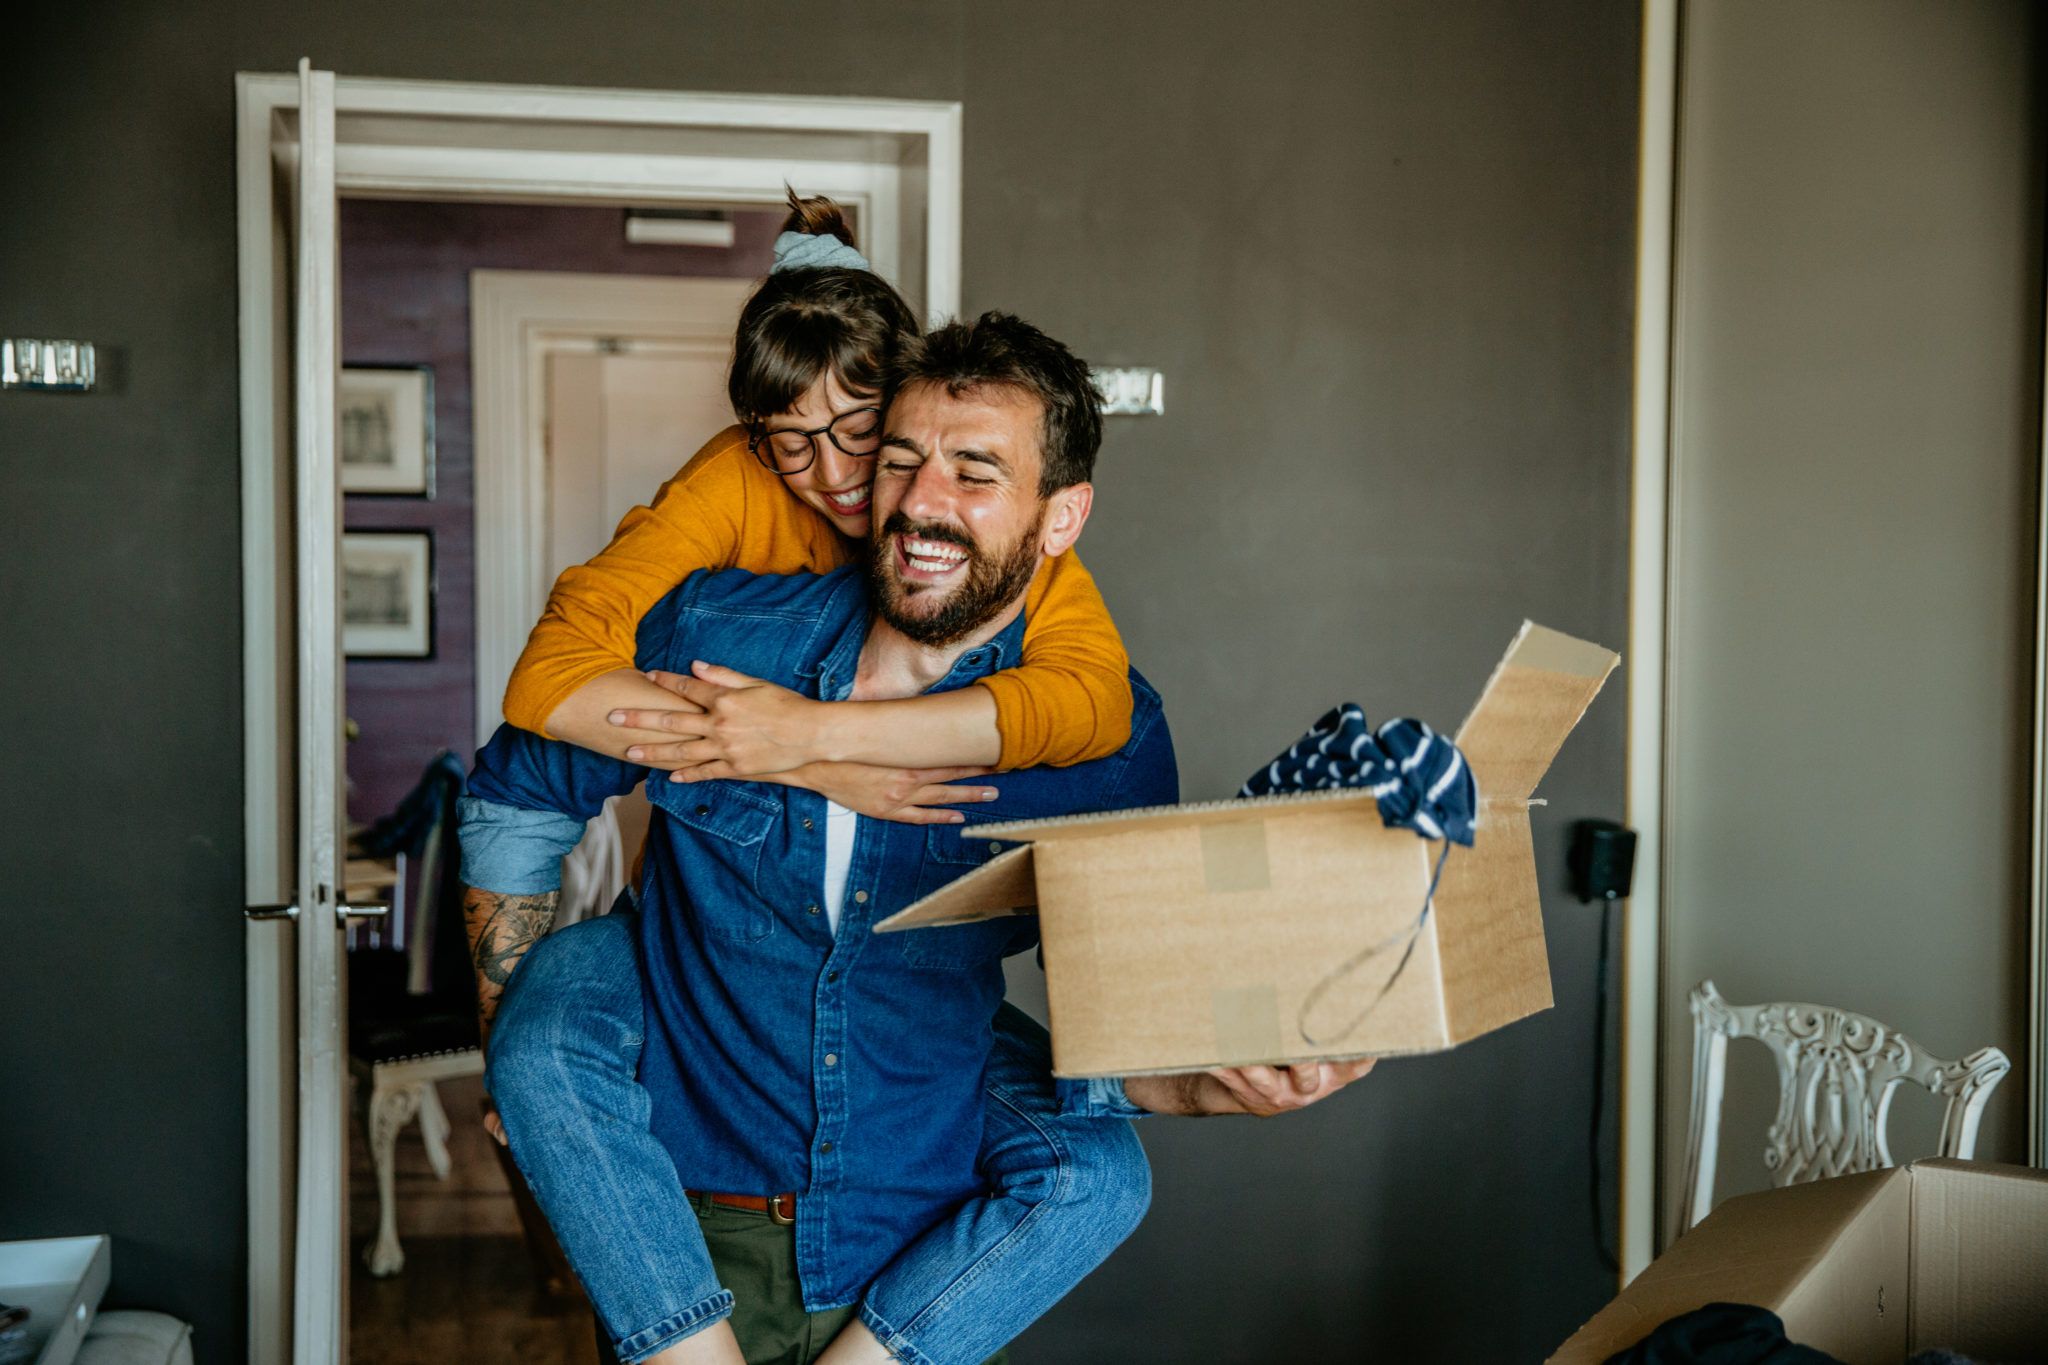 Buying your first home? Here are 7 crucial questions to ask when deciding where to live